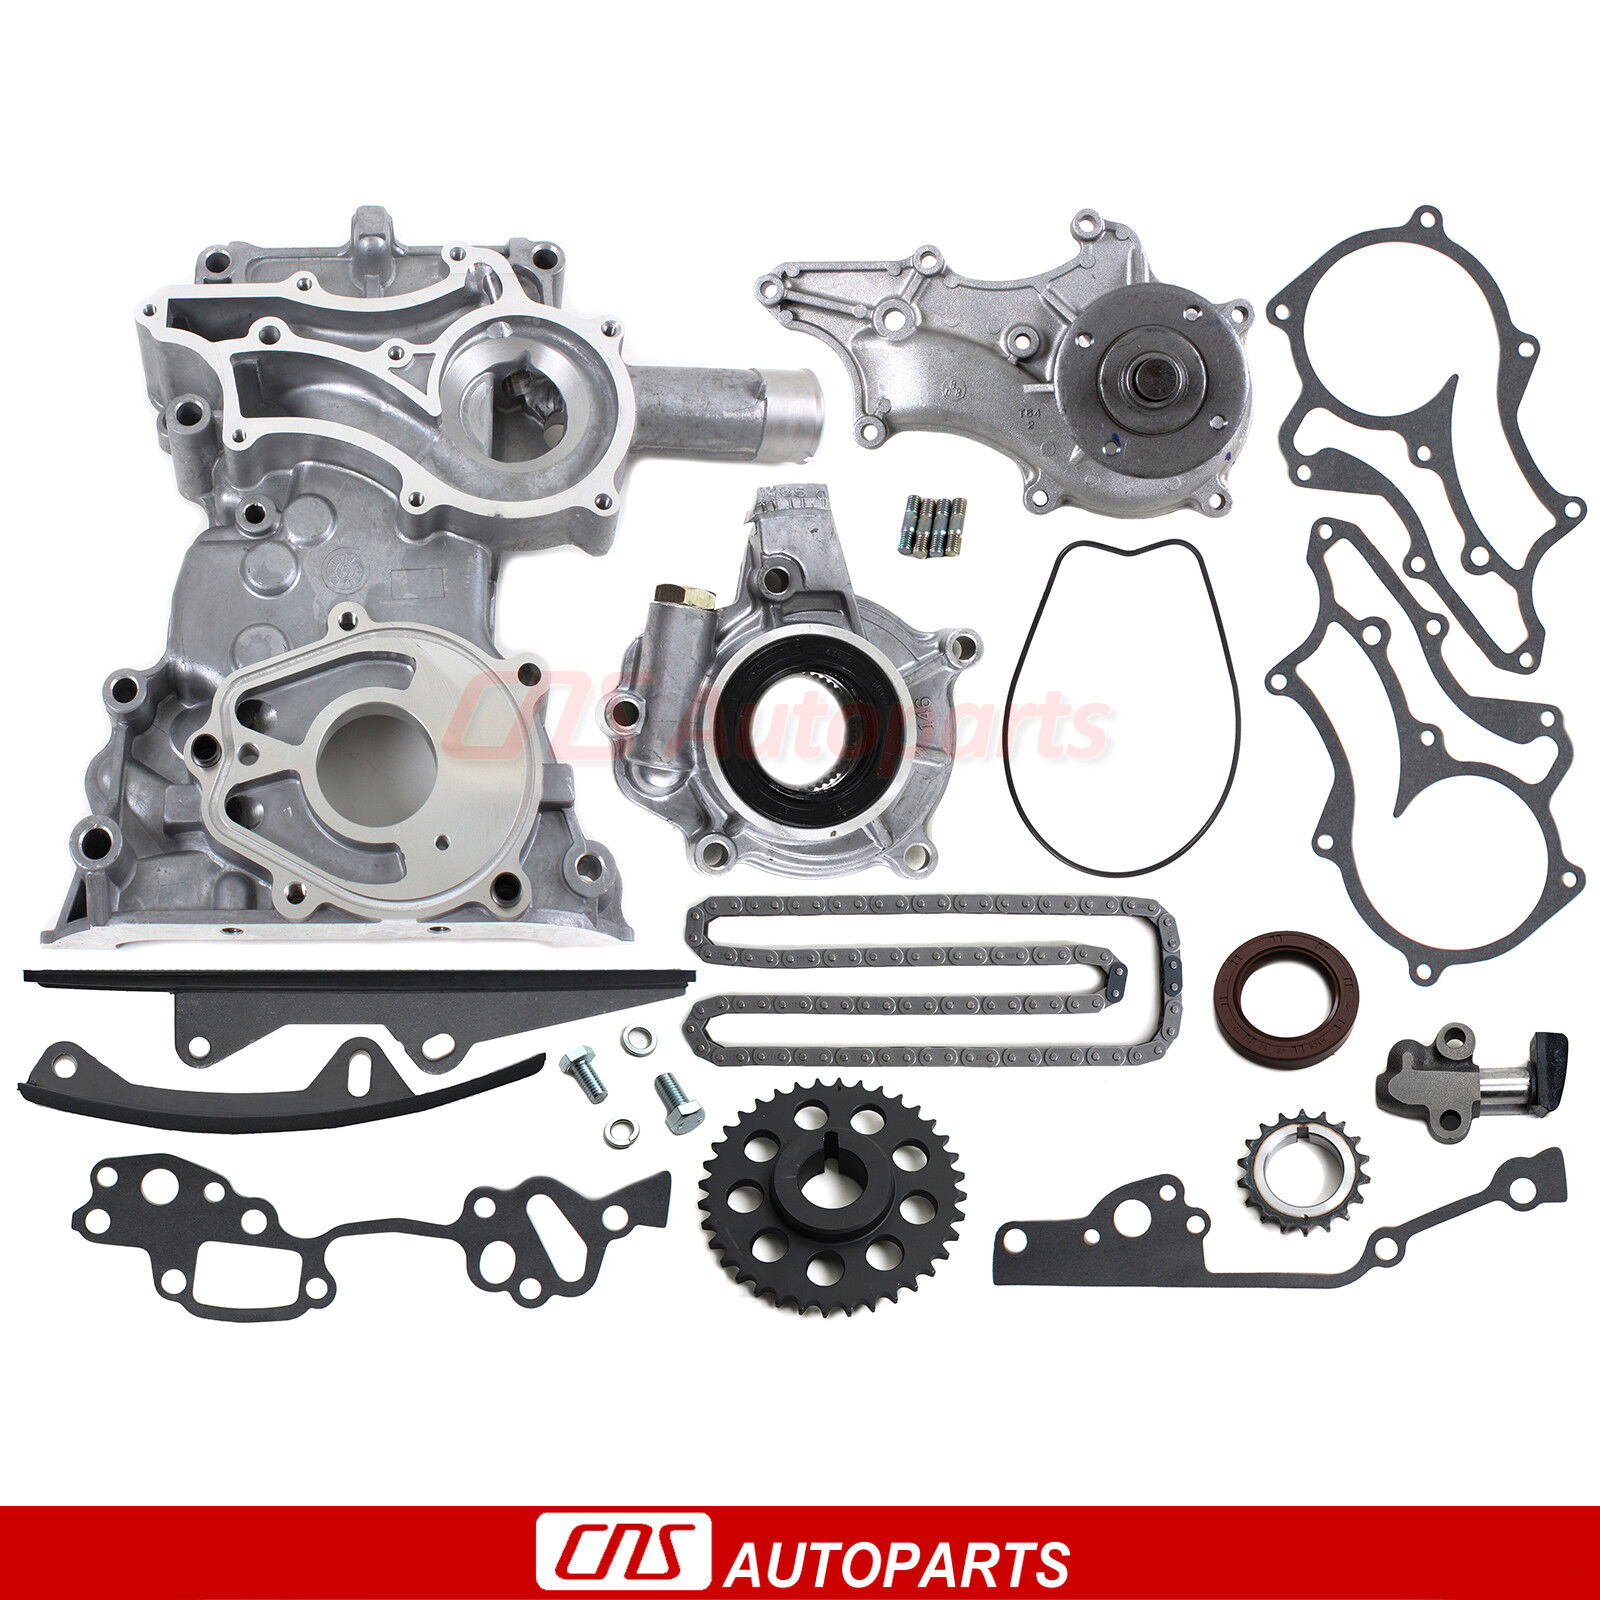 FOR TOYOTA 2.4L 22RE/R TIMING COVER CHAIN KIT(2 Heavy Duty Rails)+OIL WATER PUMP